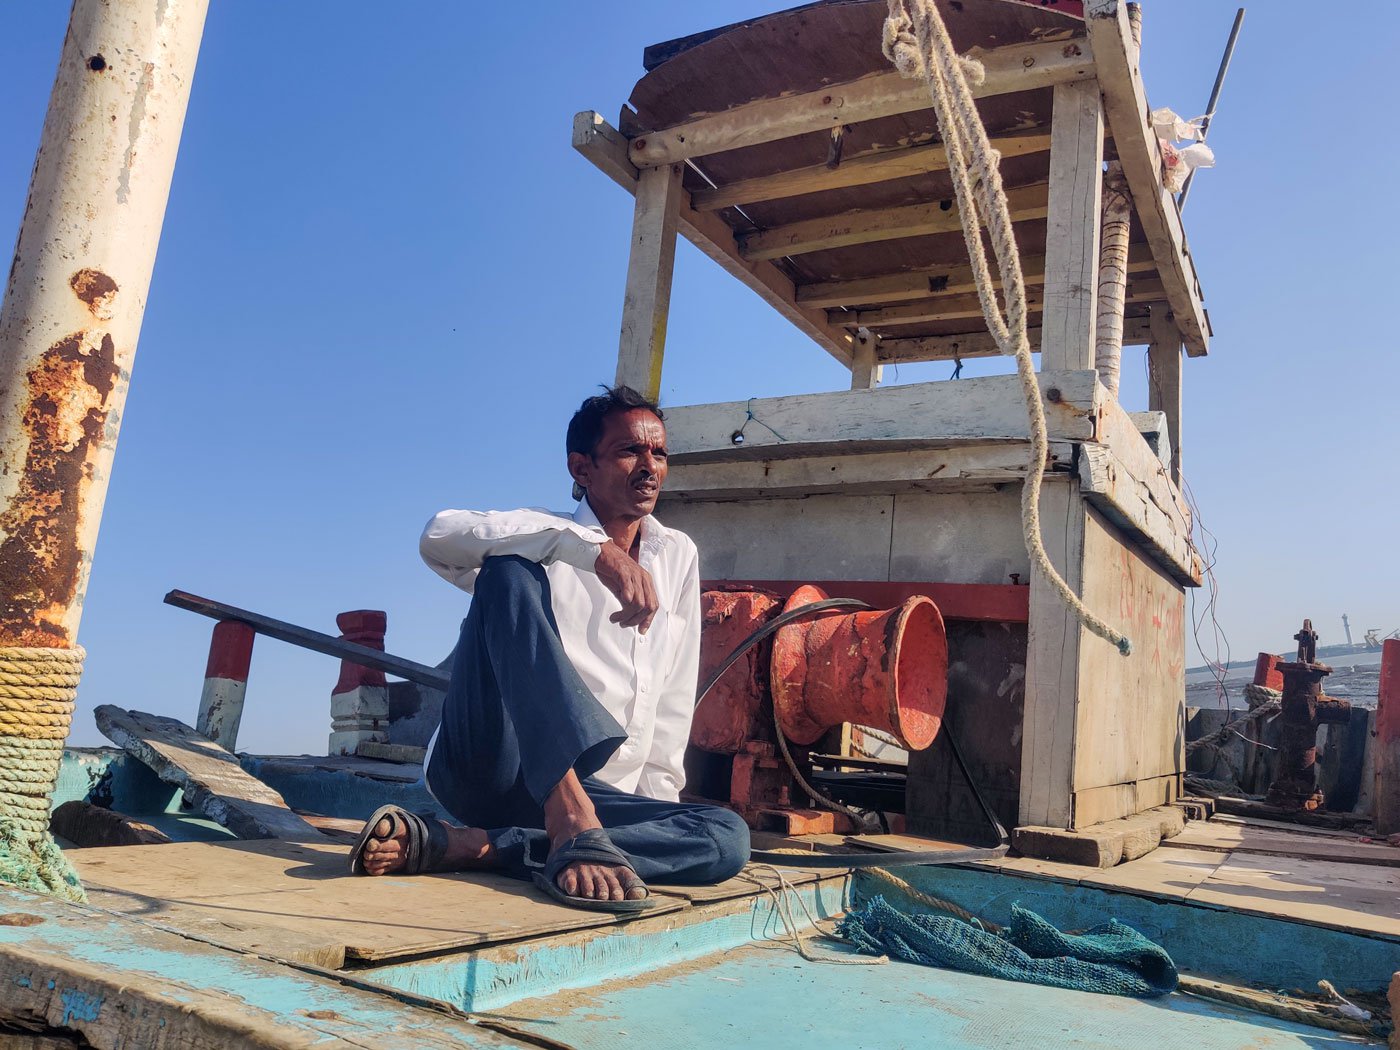 'We bear the discomfort when we fall sick on the boat and get treated only after we are back home,' says Jeevanbhai Shiyal